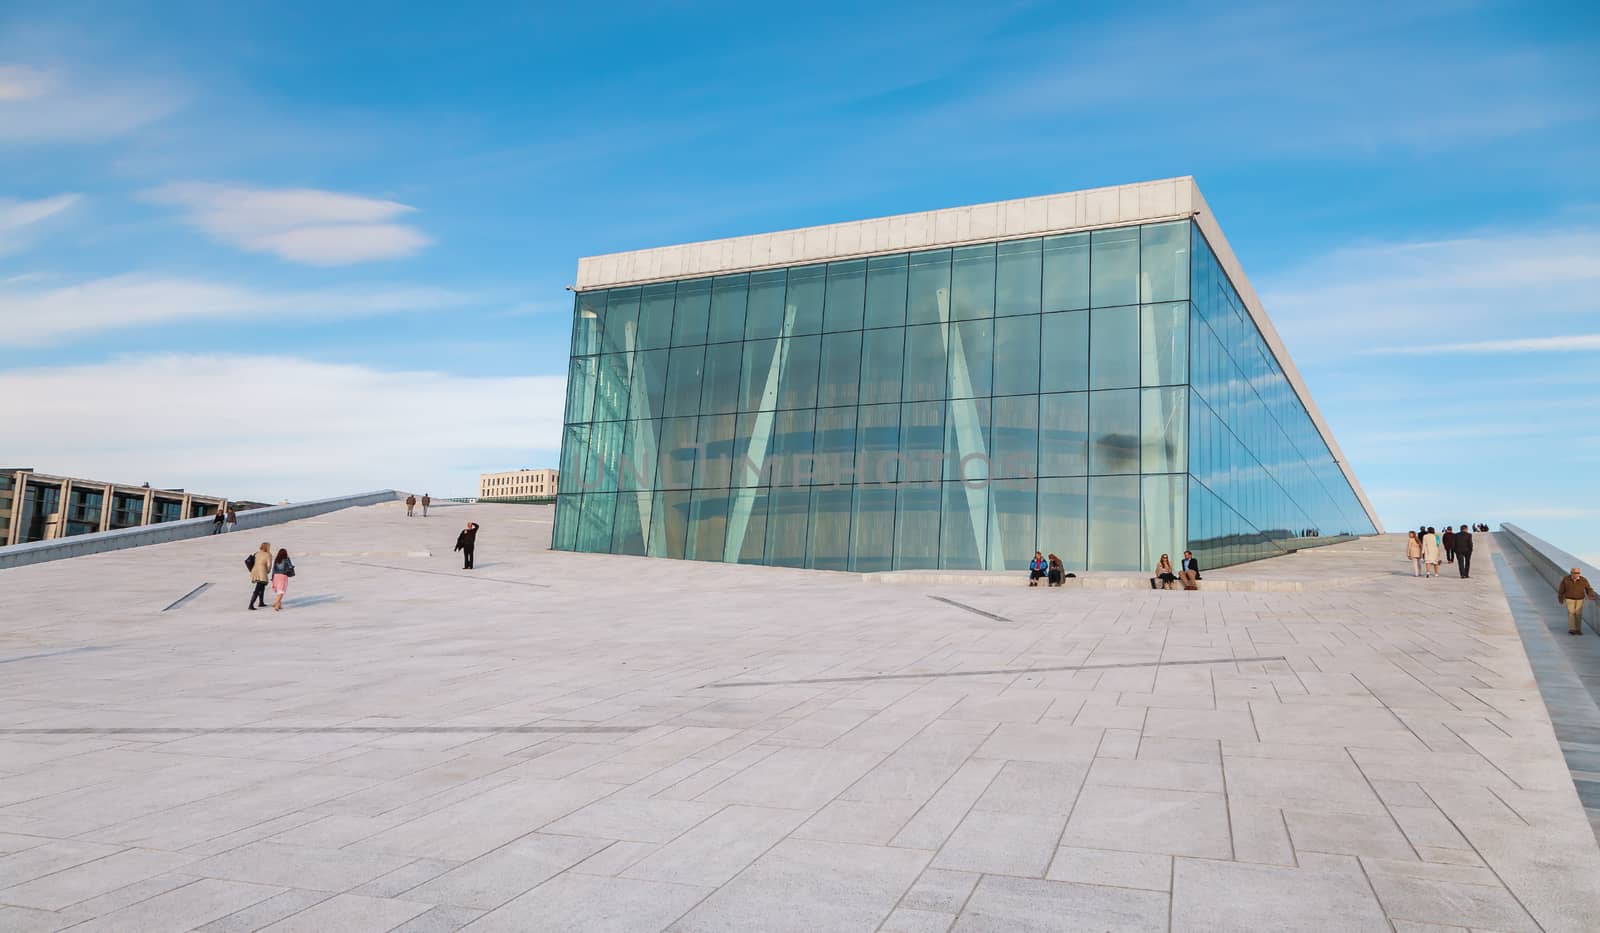 OSLO, NORWAY - May 4, 2011: People walking on the roof of the Oslo Opera House. The Oslo Opera House is home The Norwegian National Opera and Ballet, and the National Opera Theatre.